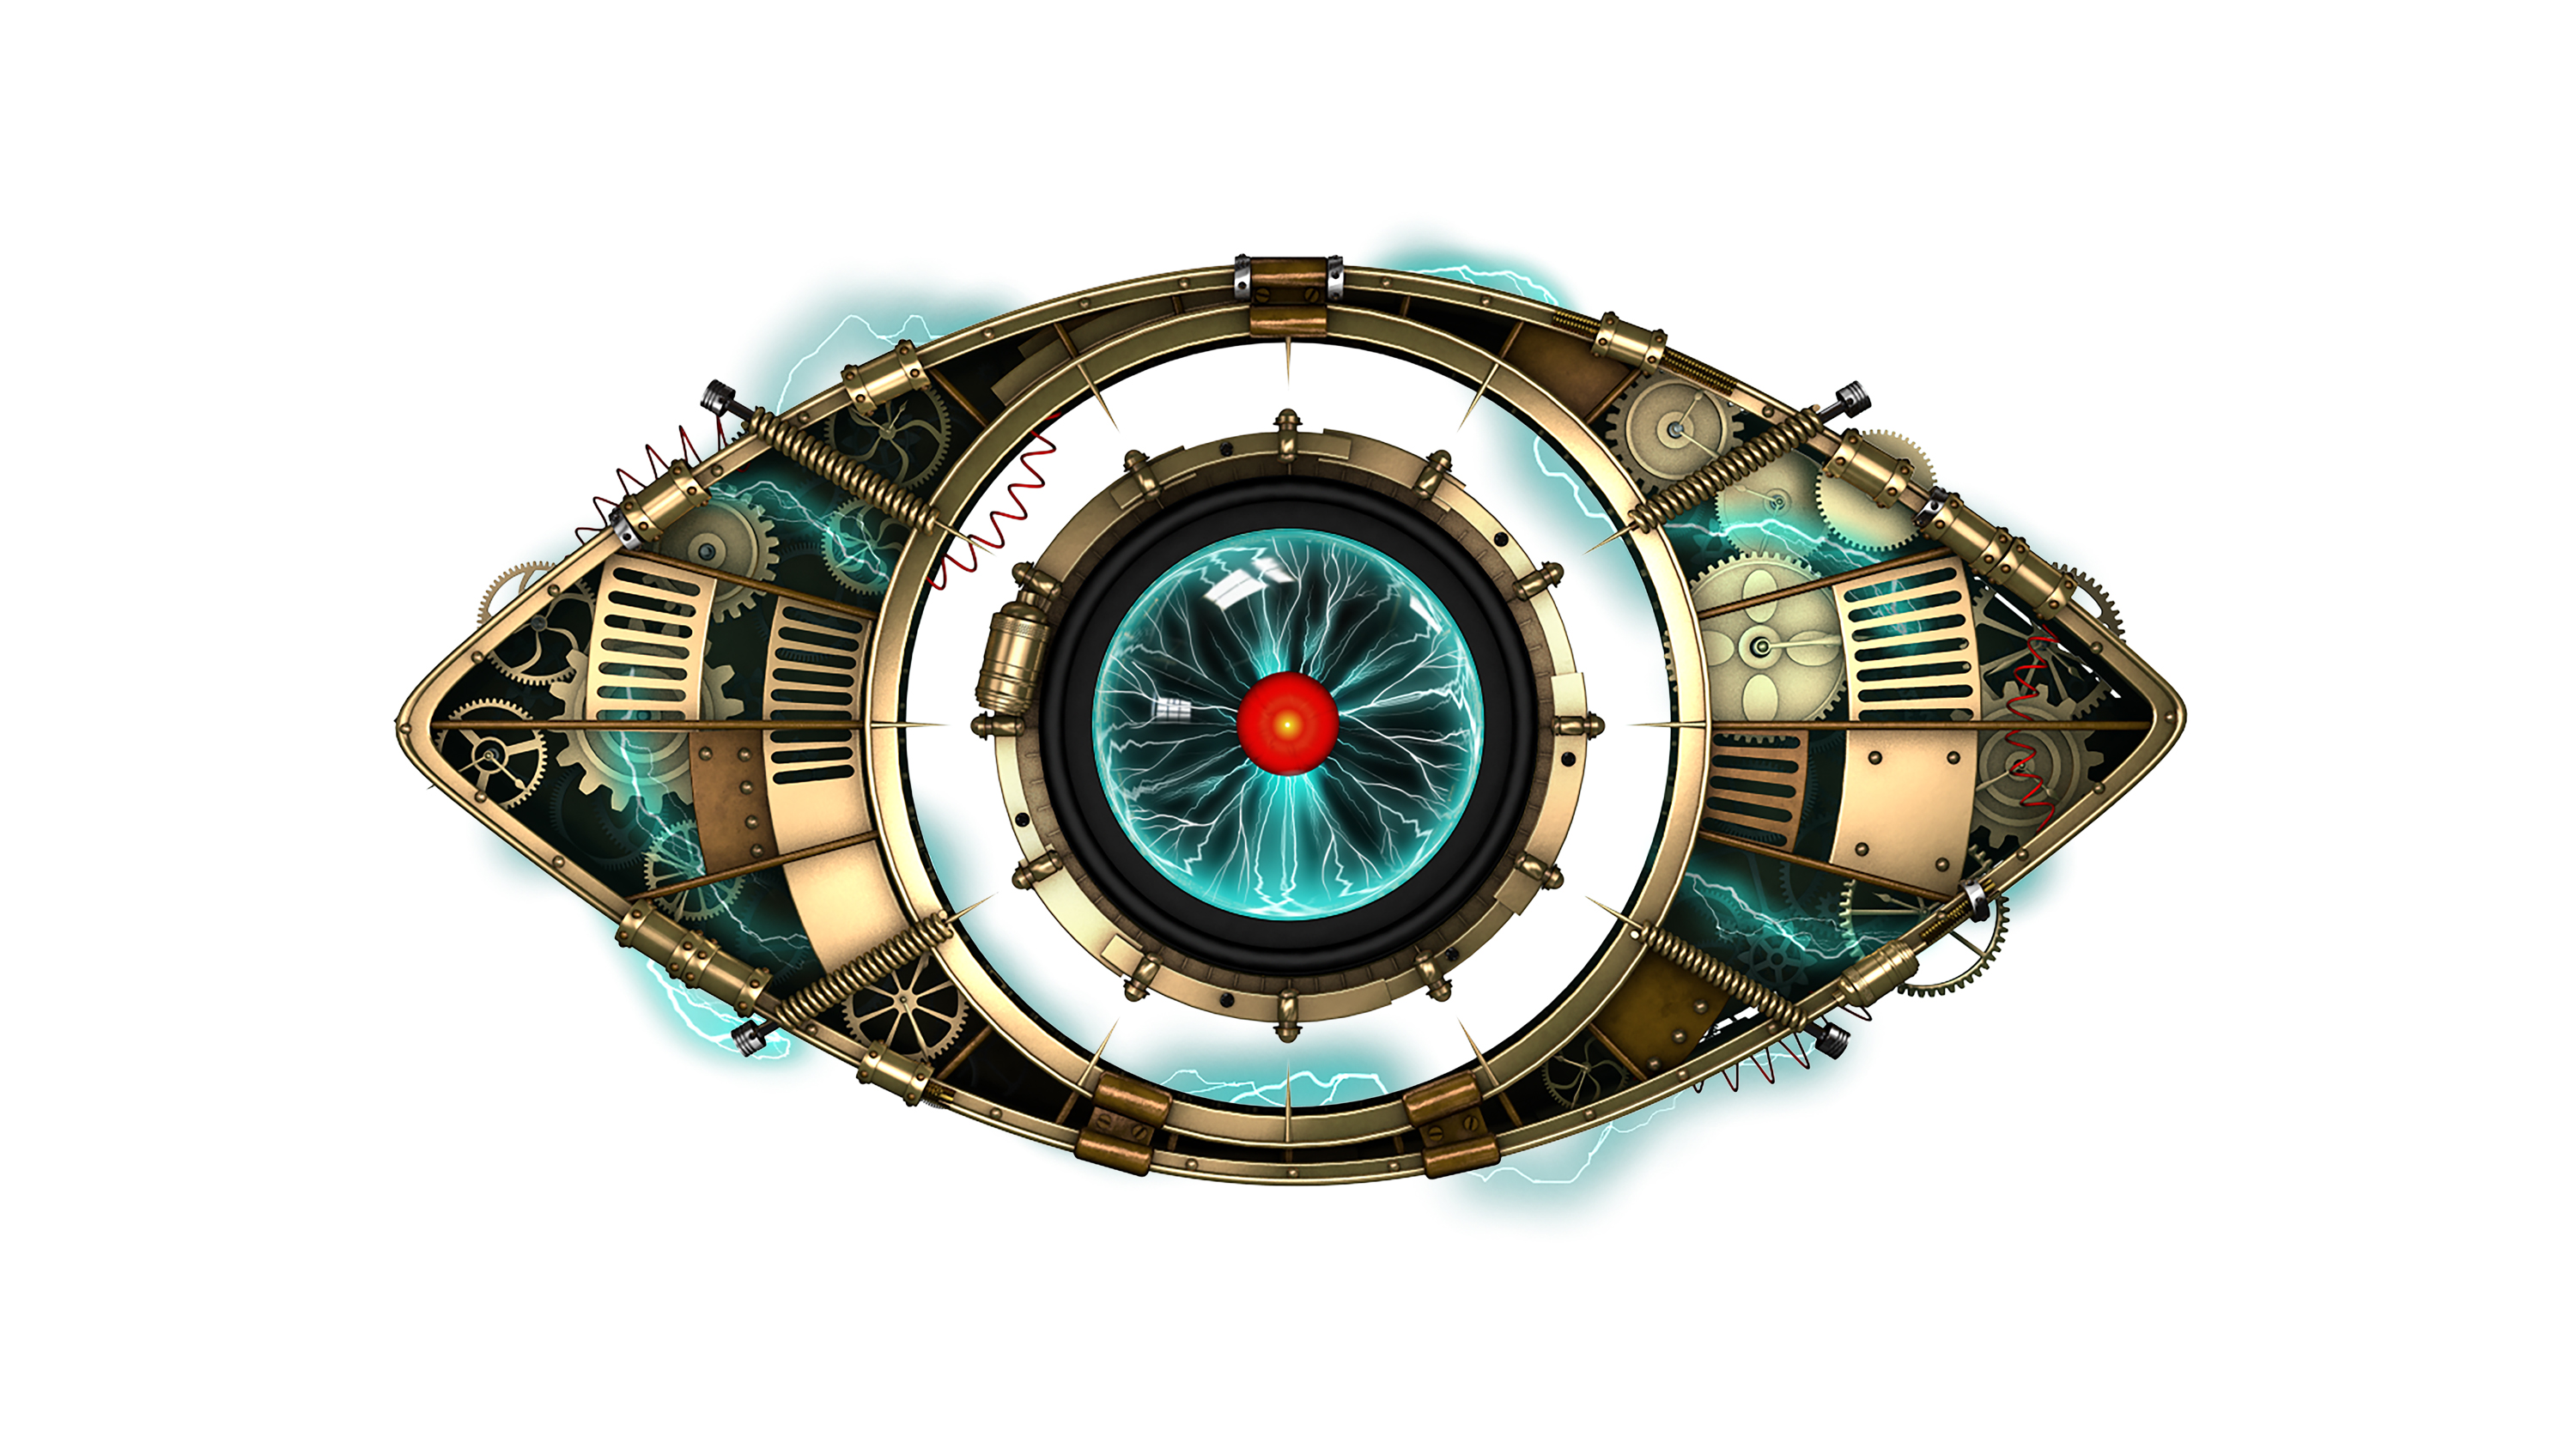 Day 24: Big Brother: Timewarp “launch” show scheduled for June 14th